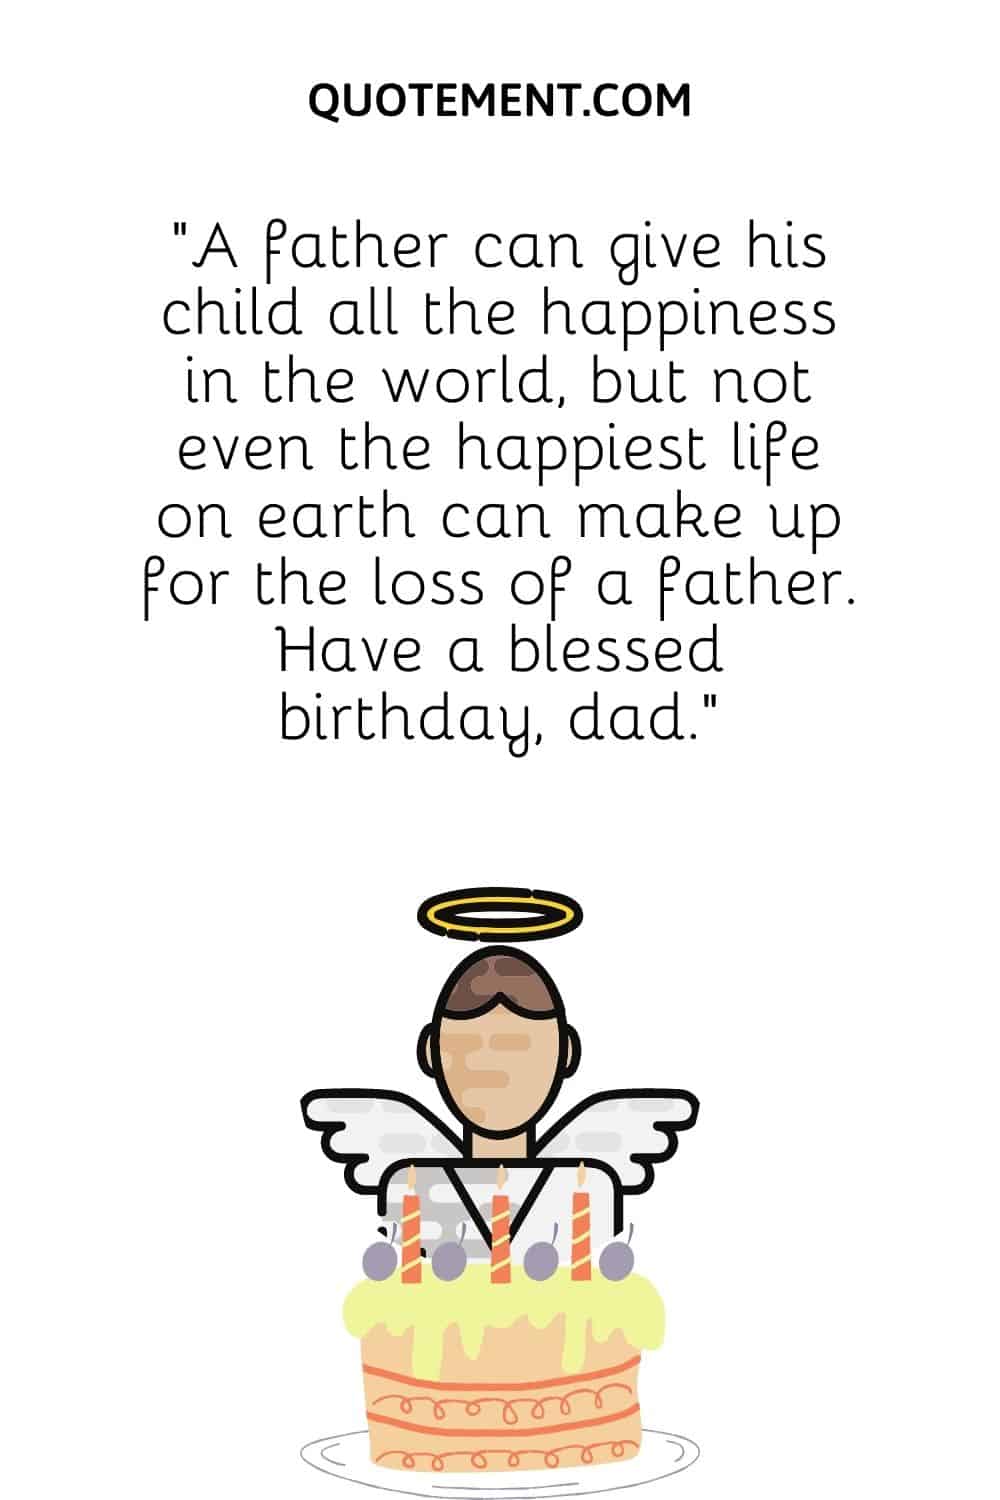 angel and a birthday cake image representing the loveliest dad birthday in heaven wish
